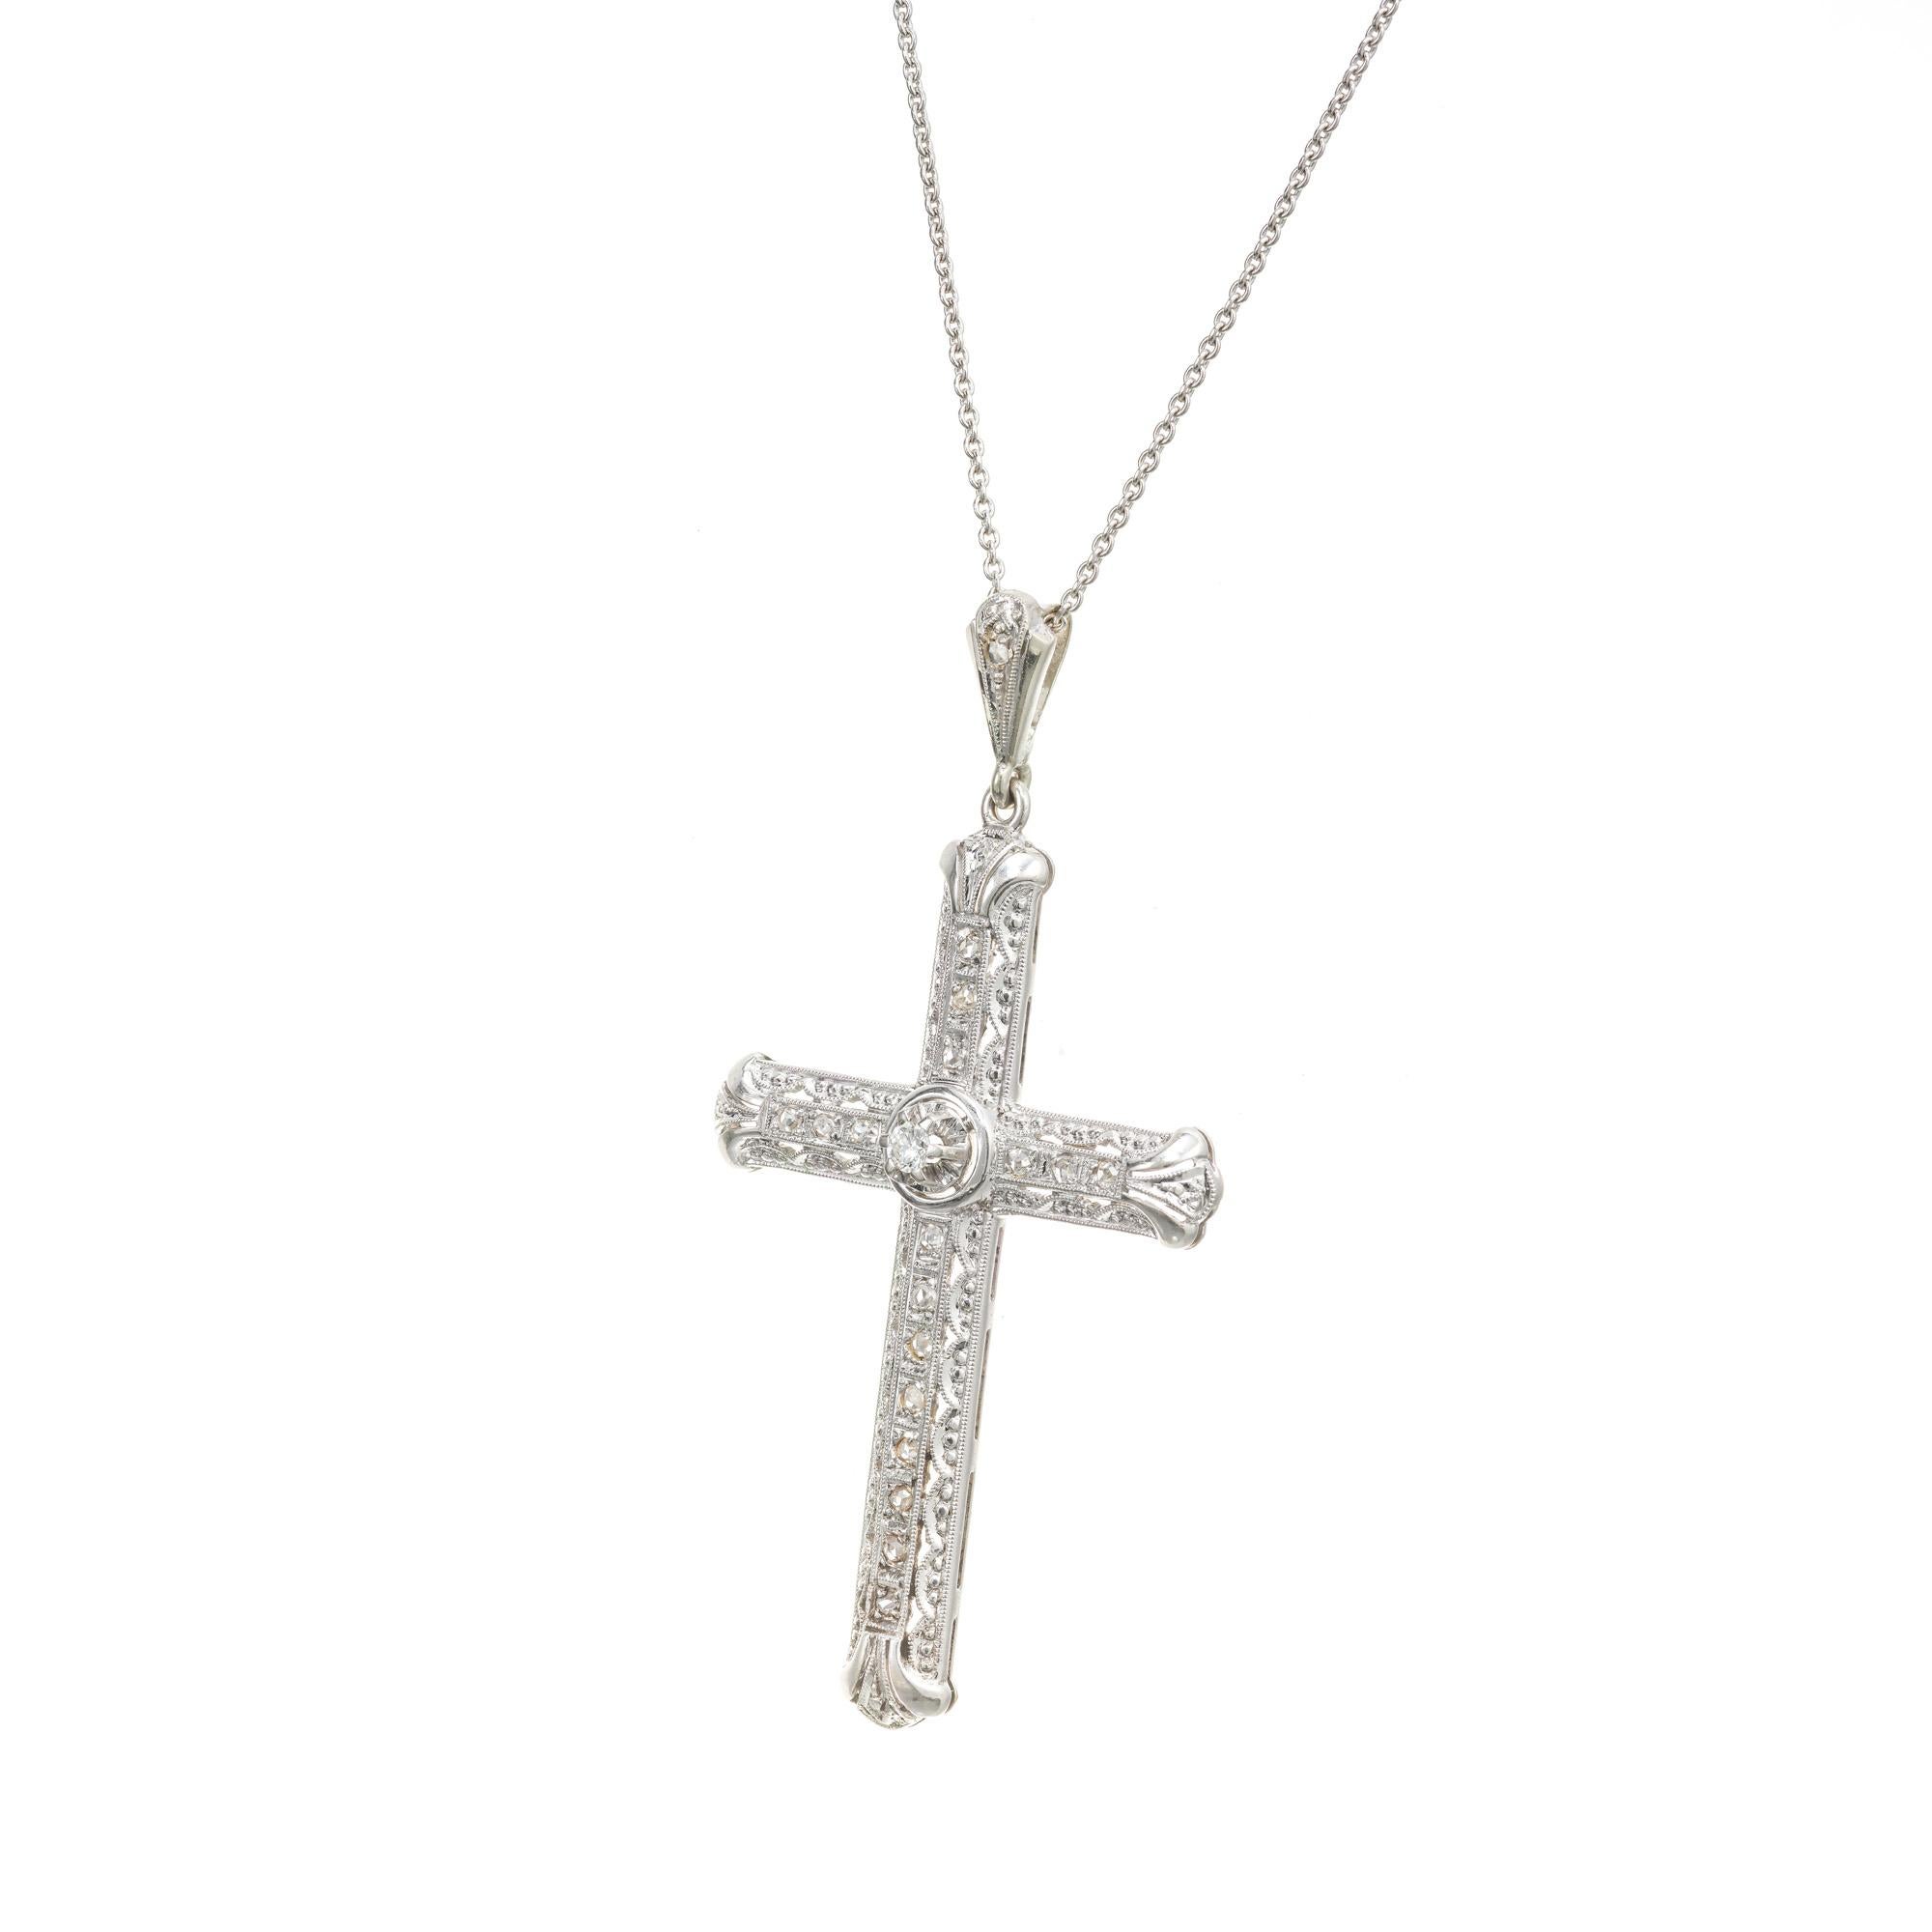 Vintage 1925-1930 18k white gold cross with excellent detailing, 17 rose cut diamonds and one brilliant cut center diamond. 18k white gold 18 inch chain. 

1 round diamond, I SI approx. .4cts
17 rose cut diamonds, H-I VS- SI approx. .21cts
18k white